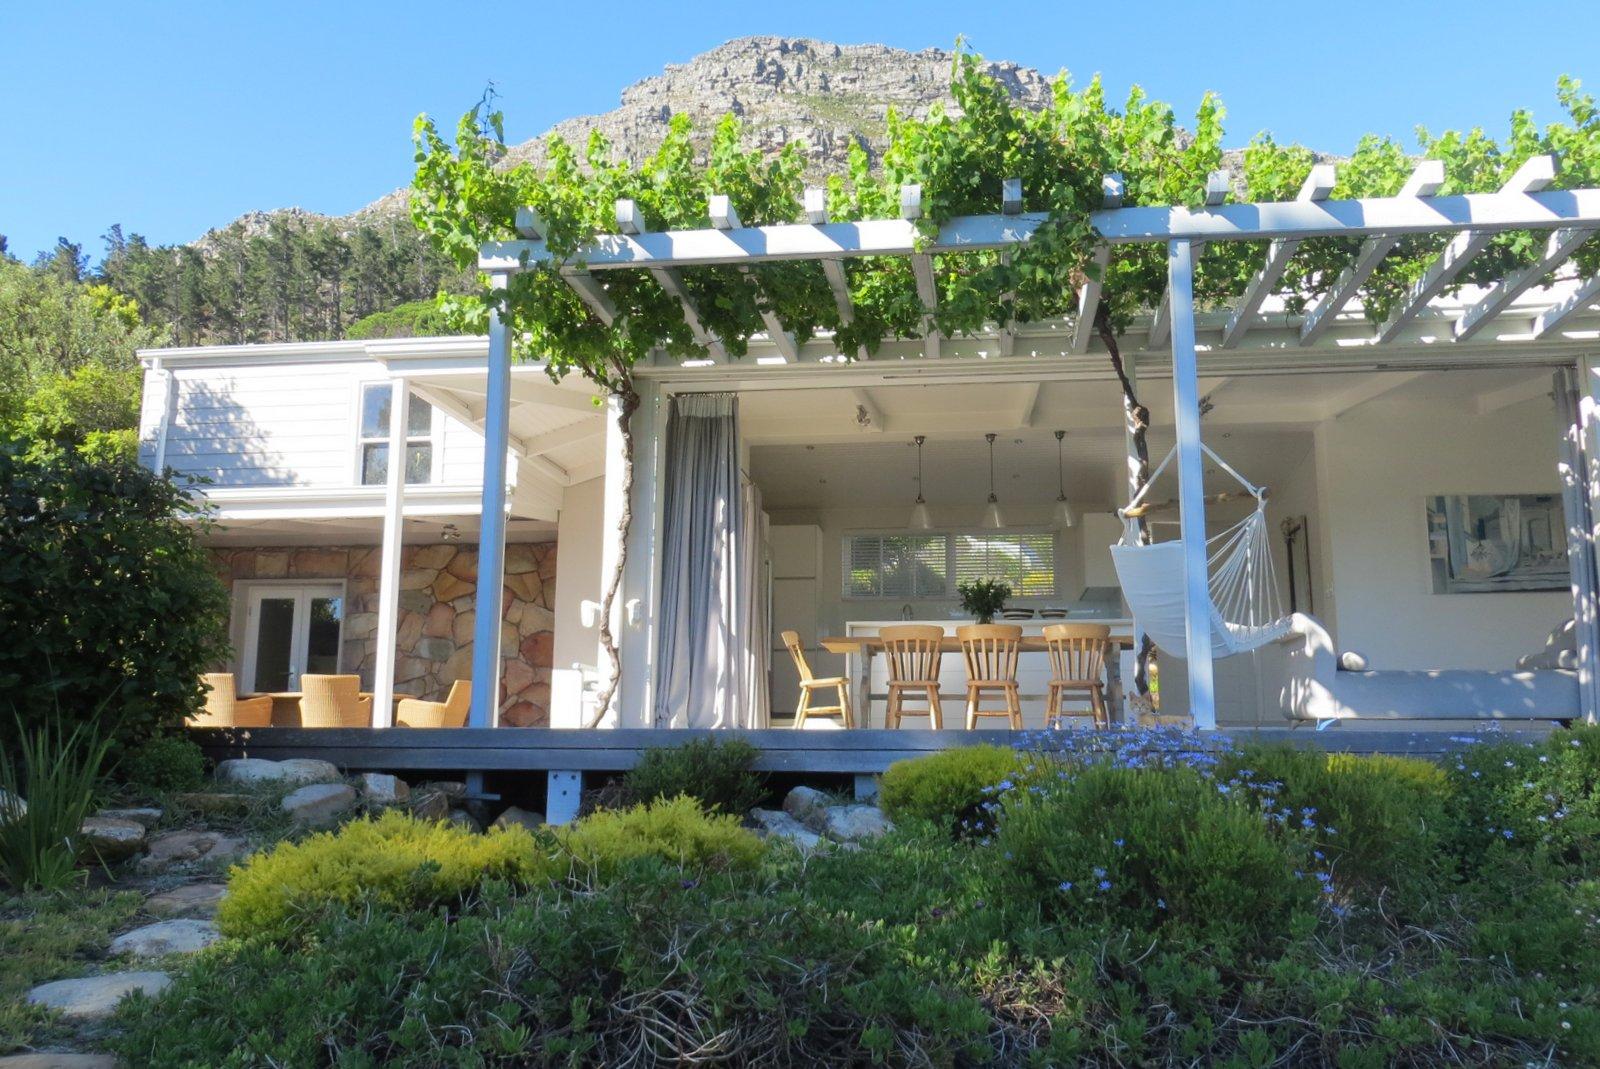 Photo 6 of Riverstone Villa accommodation in Hout Bay, Cape Town with 4 bedrooms and 3 bathrooms